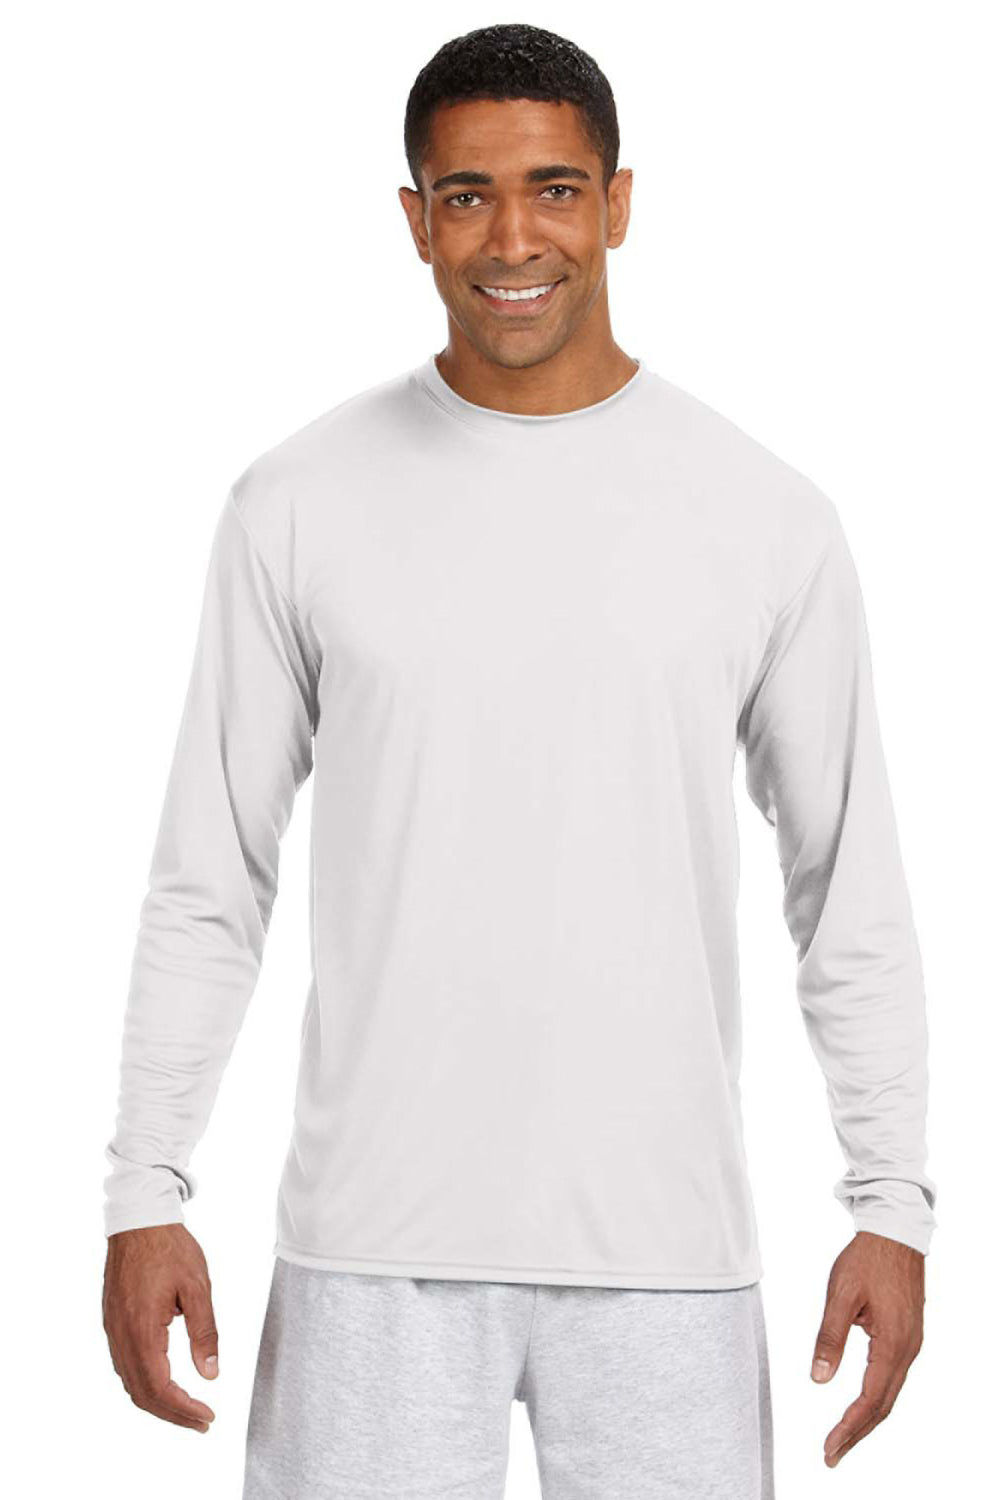 A4 N3165 Mens Performance Moisture Wicking Long Sleeve Crewneck T-Shirt White Model Front